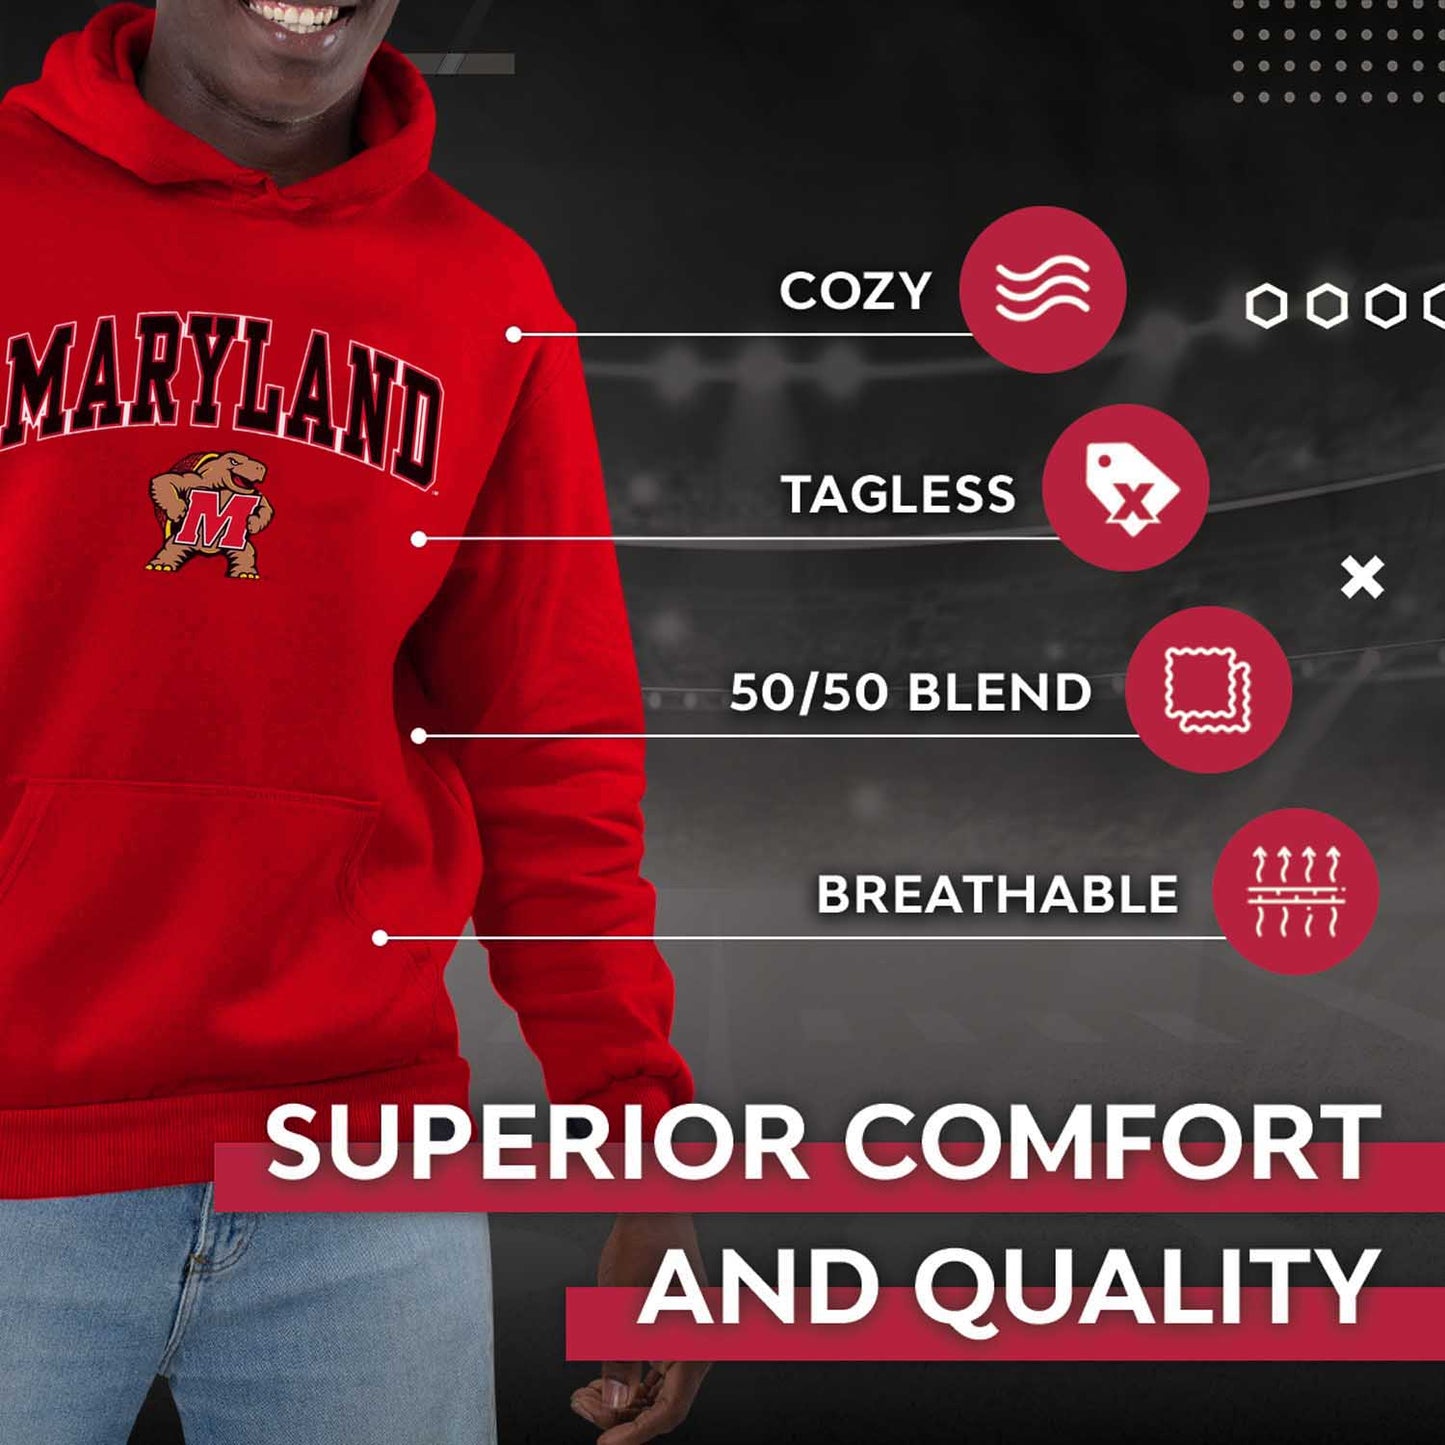 Maryland Terrapins Adult Arch & Logo Soft Style Gameday Hooded Sweatshirt - Red